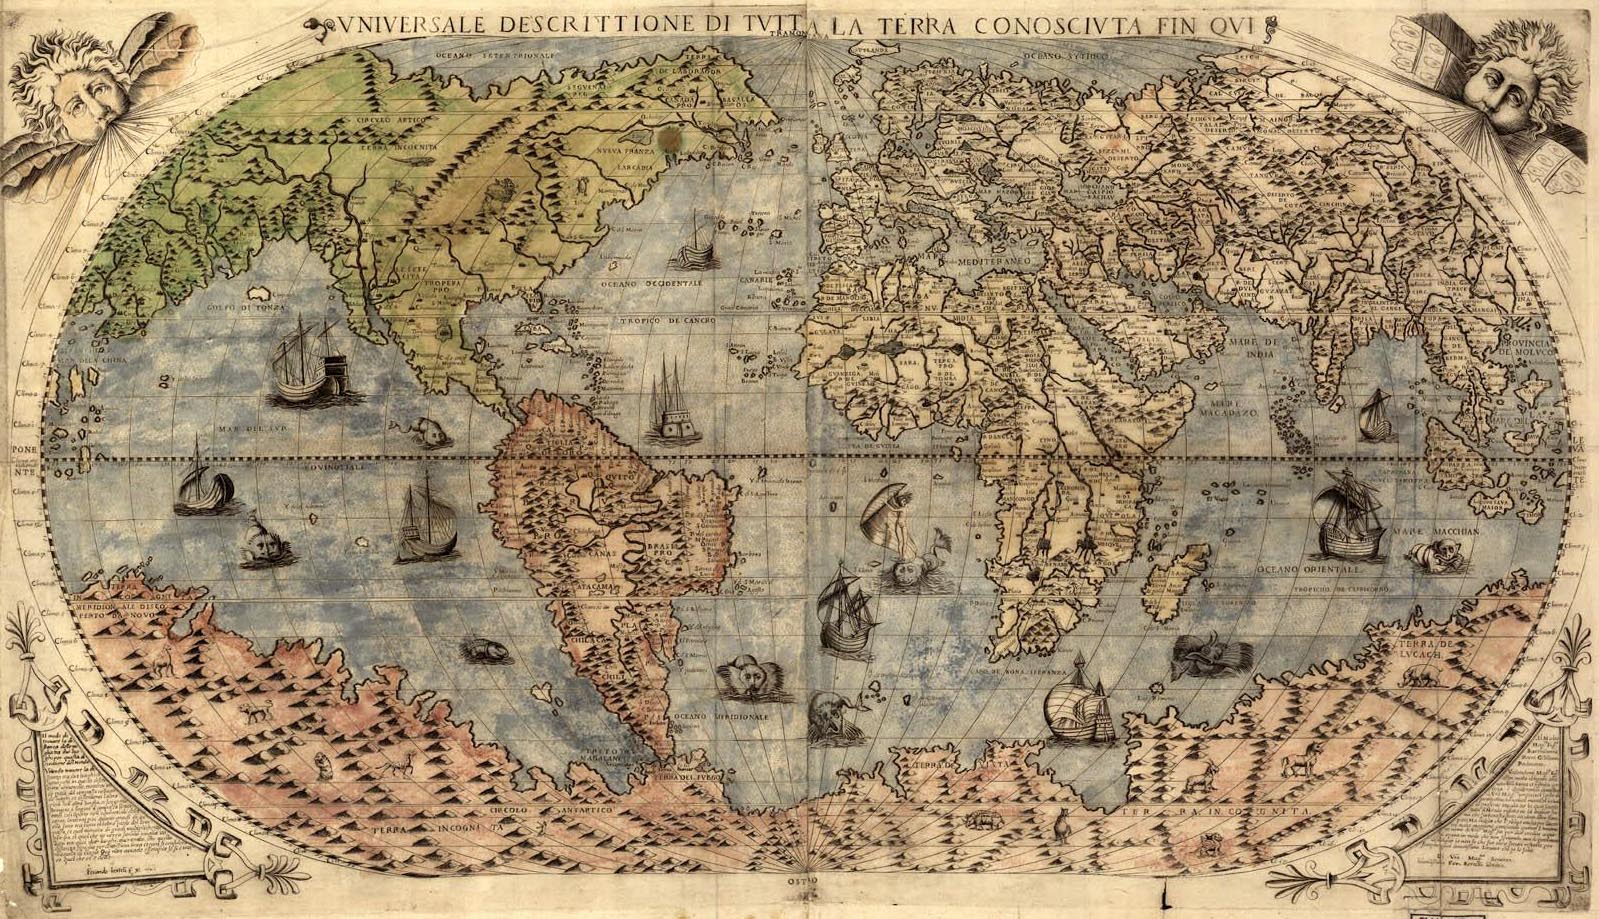 Old Map of the World